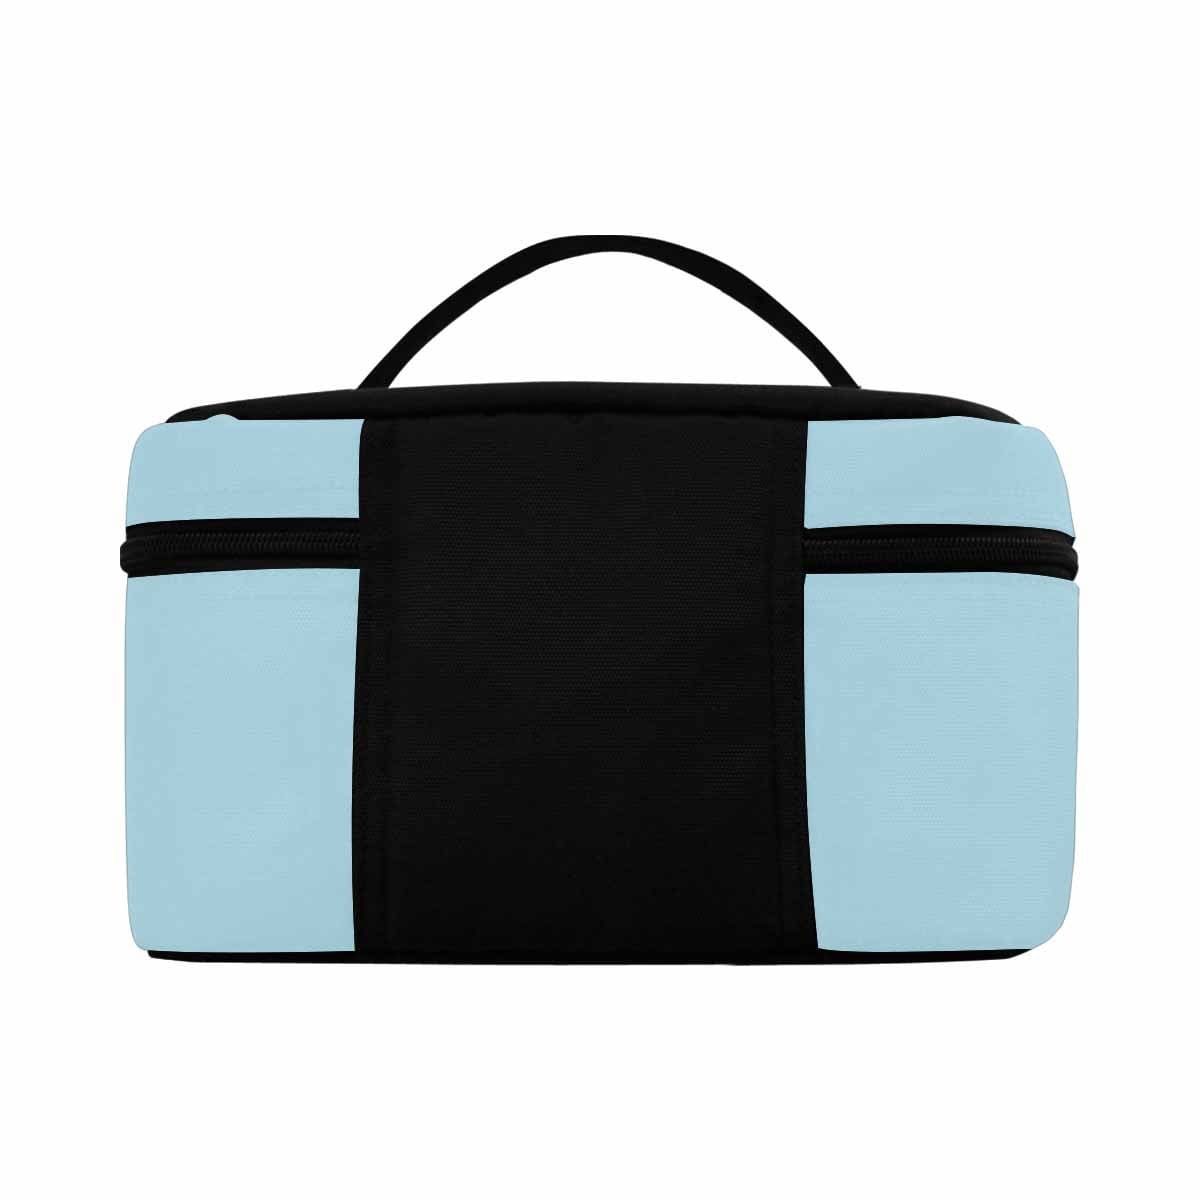 Cosmetic Bag Light Blue Travel Case - Bags | Cosmetic Bags